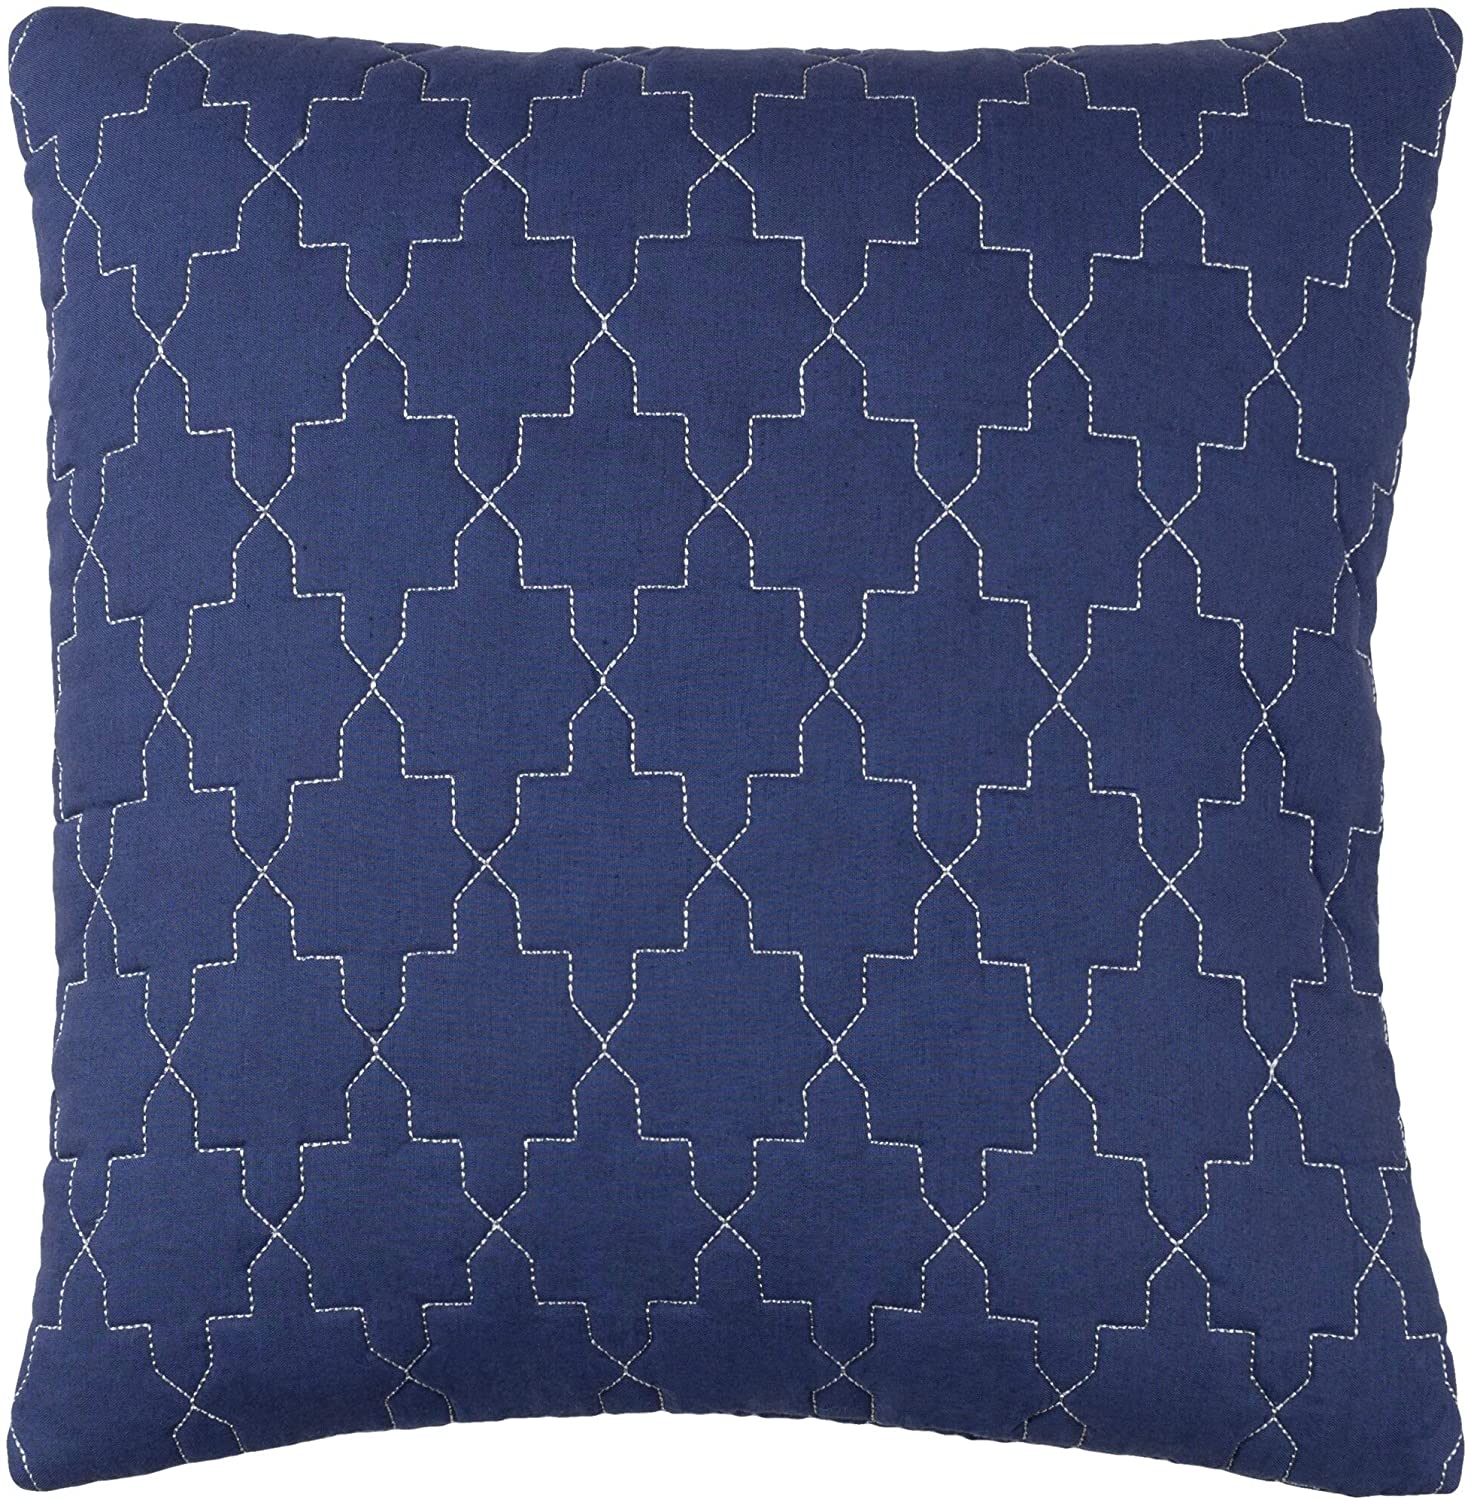 Decorative Navy 20 inch Throw Pillow Cover Blue Motif Cabin Lodge Cotton Linen One Removable